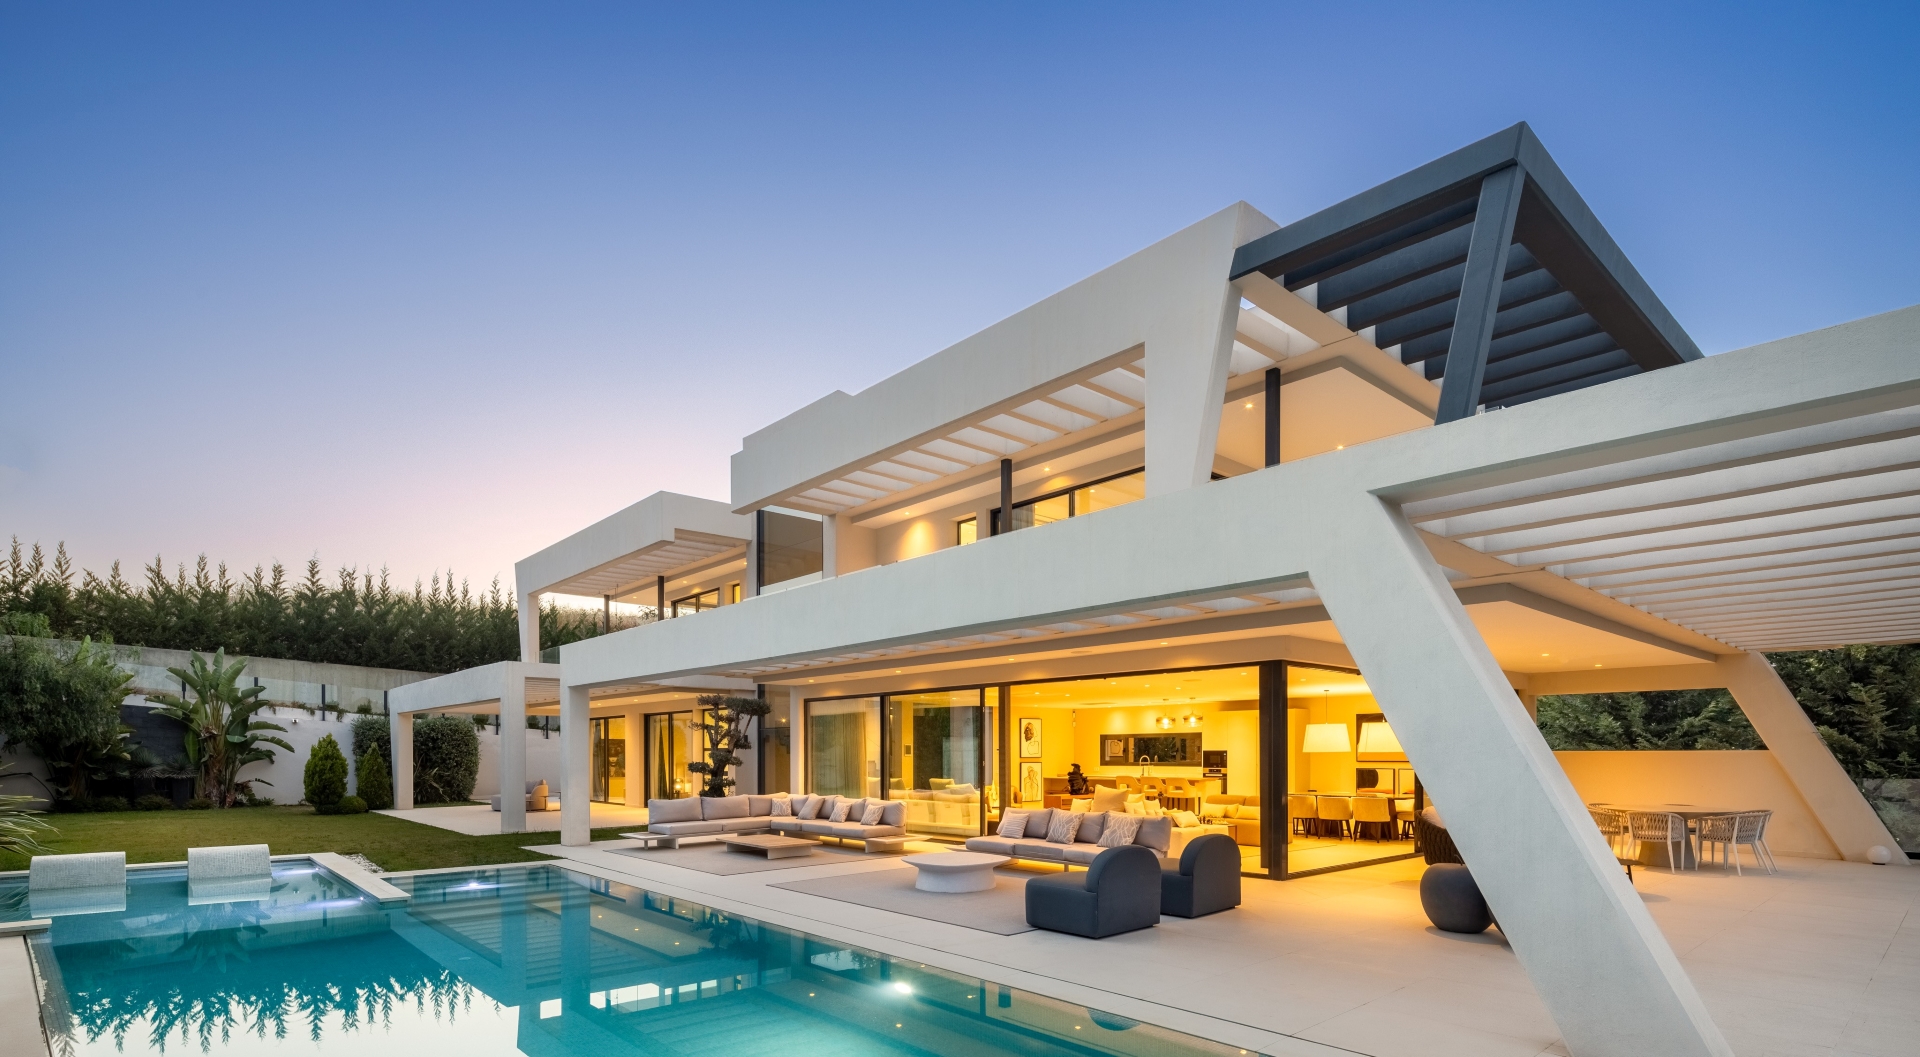 Luxurious modern villa with panoramic views in Nueva Andalucía Marbella